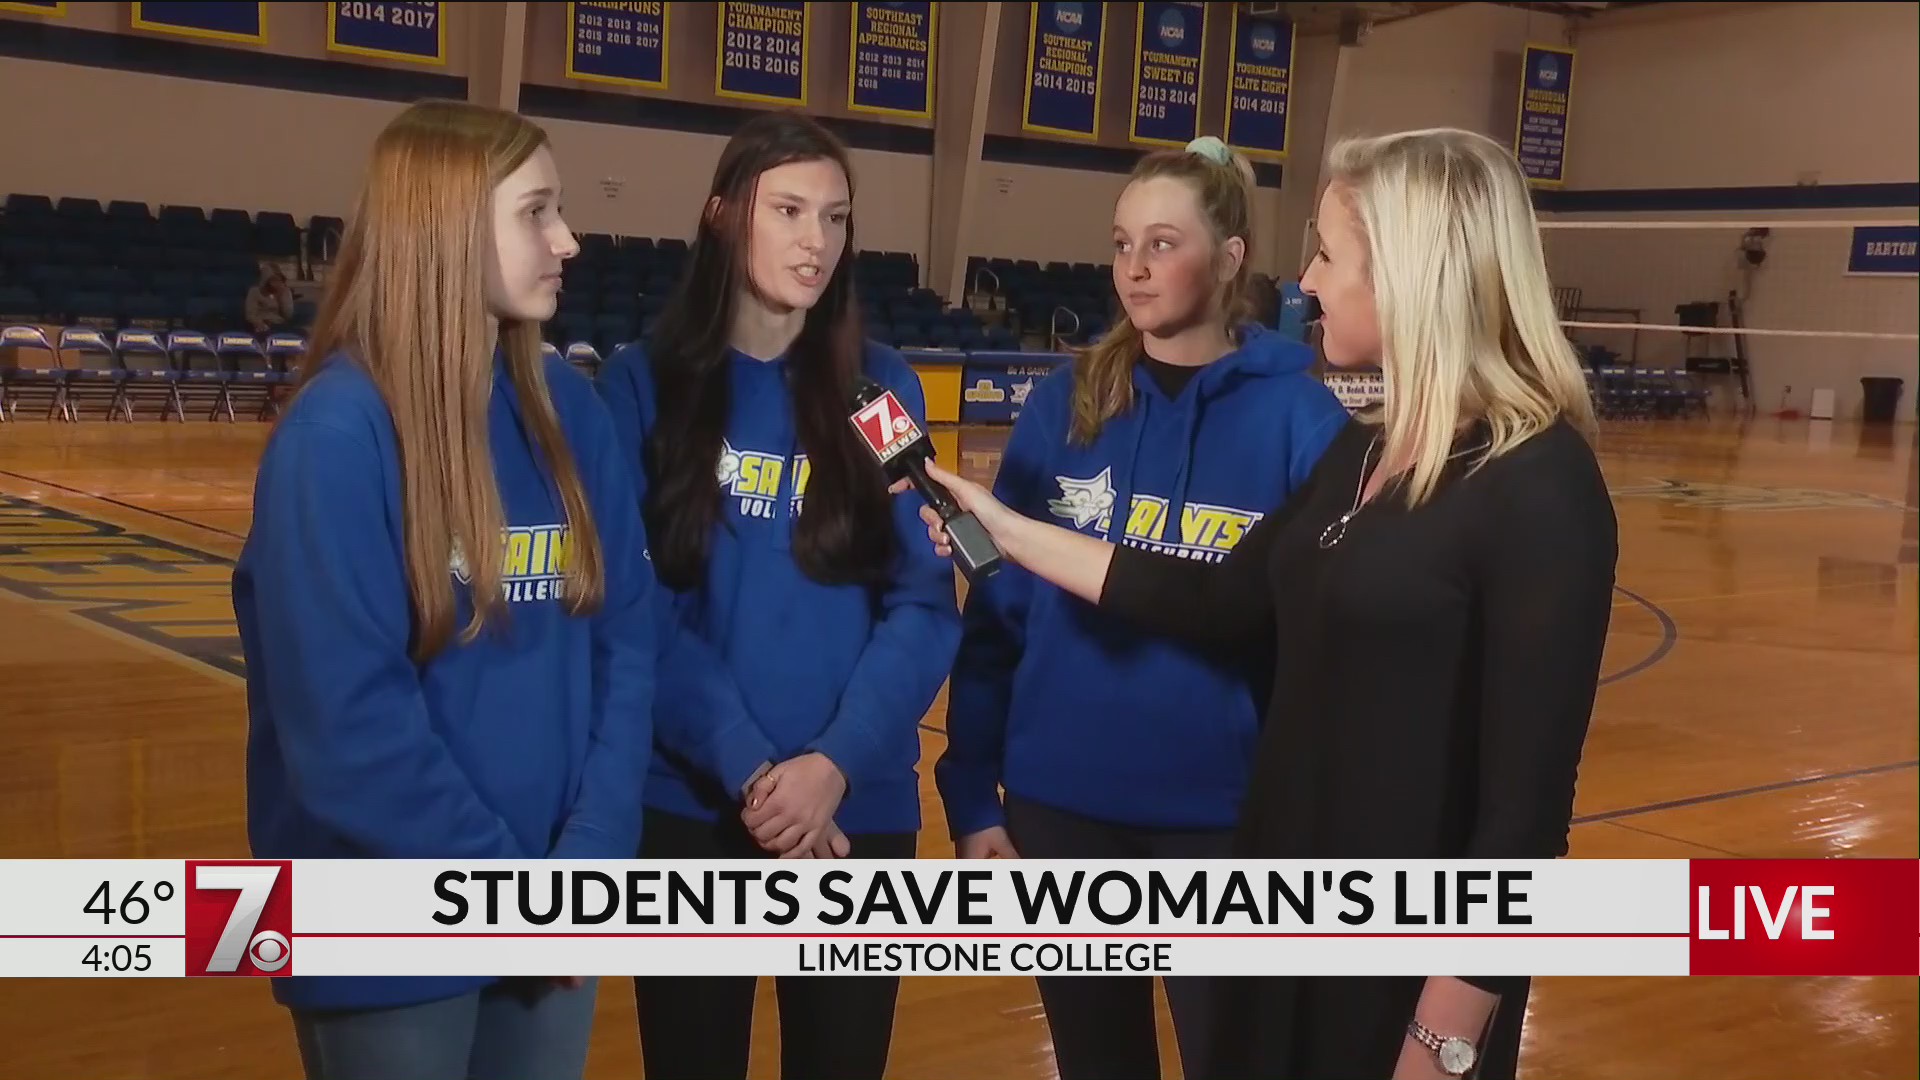 Thumbnail for the video titled "Limestone College volleyball players help save woman's life while serving community"